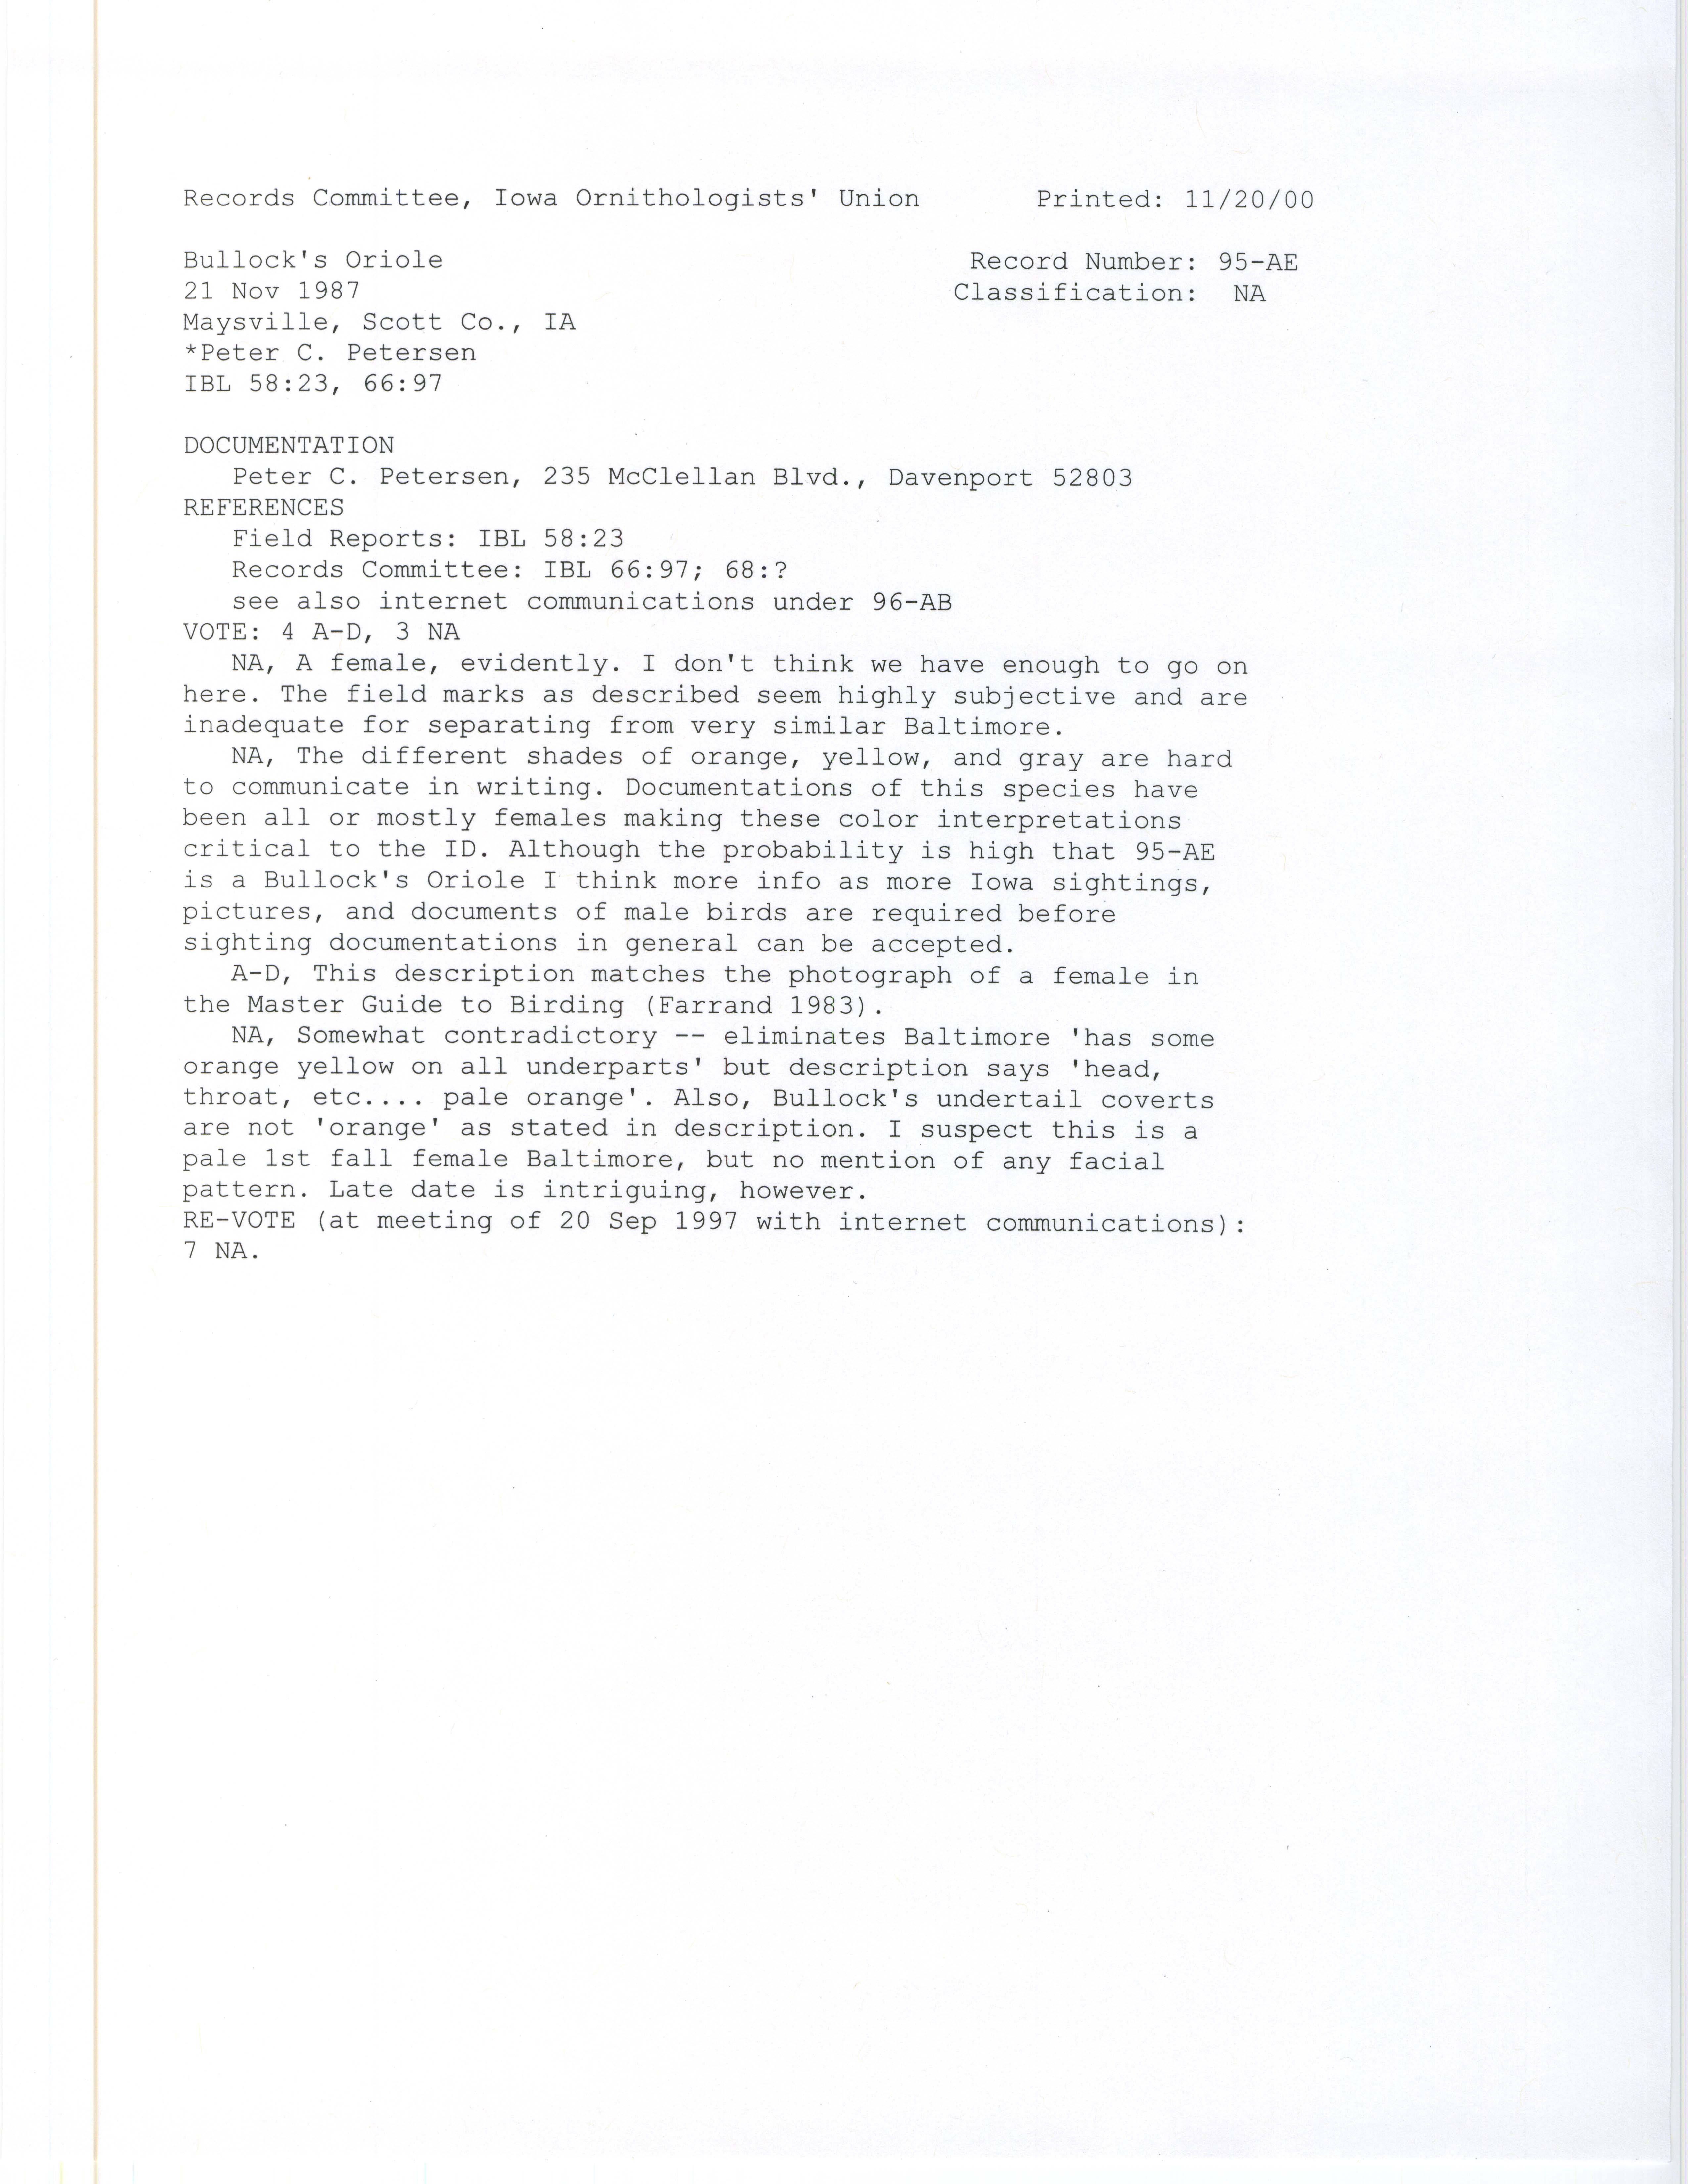 Records Committee review for rare bird sighting for Bullock's Oriole at Maysville, 1987